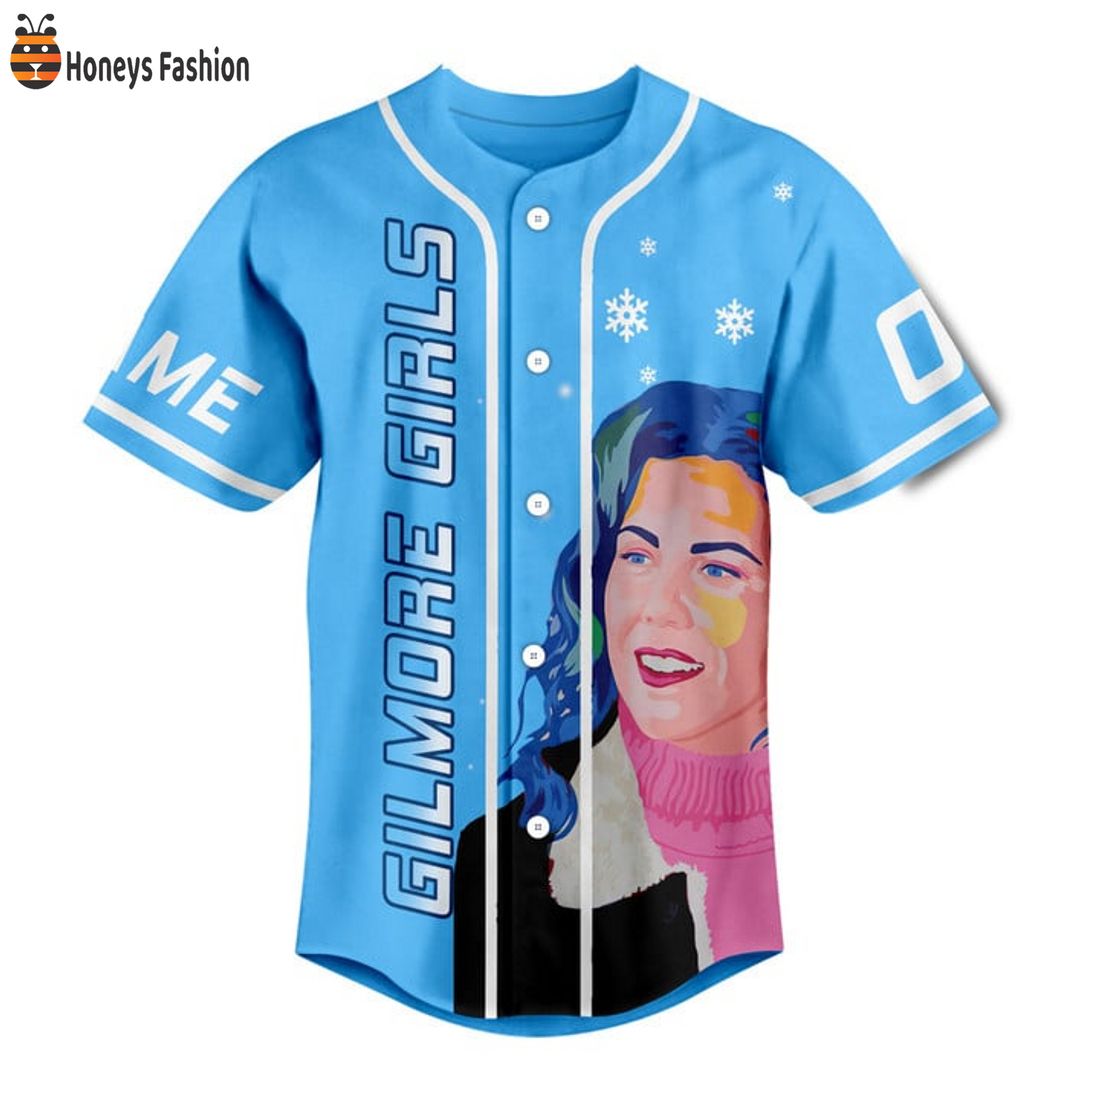 SELLER Gilmore Girls I Smell Snow Personalized Name Number Baseball Jersey